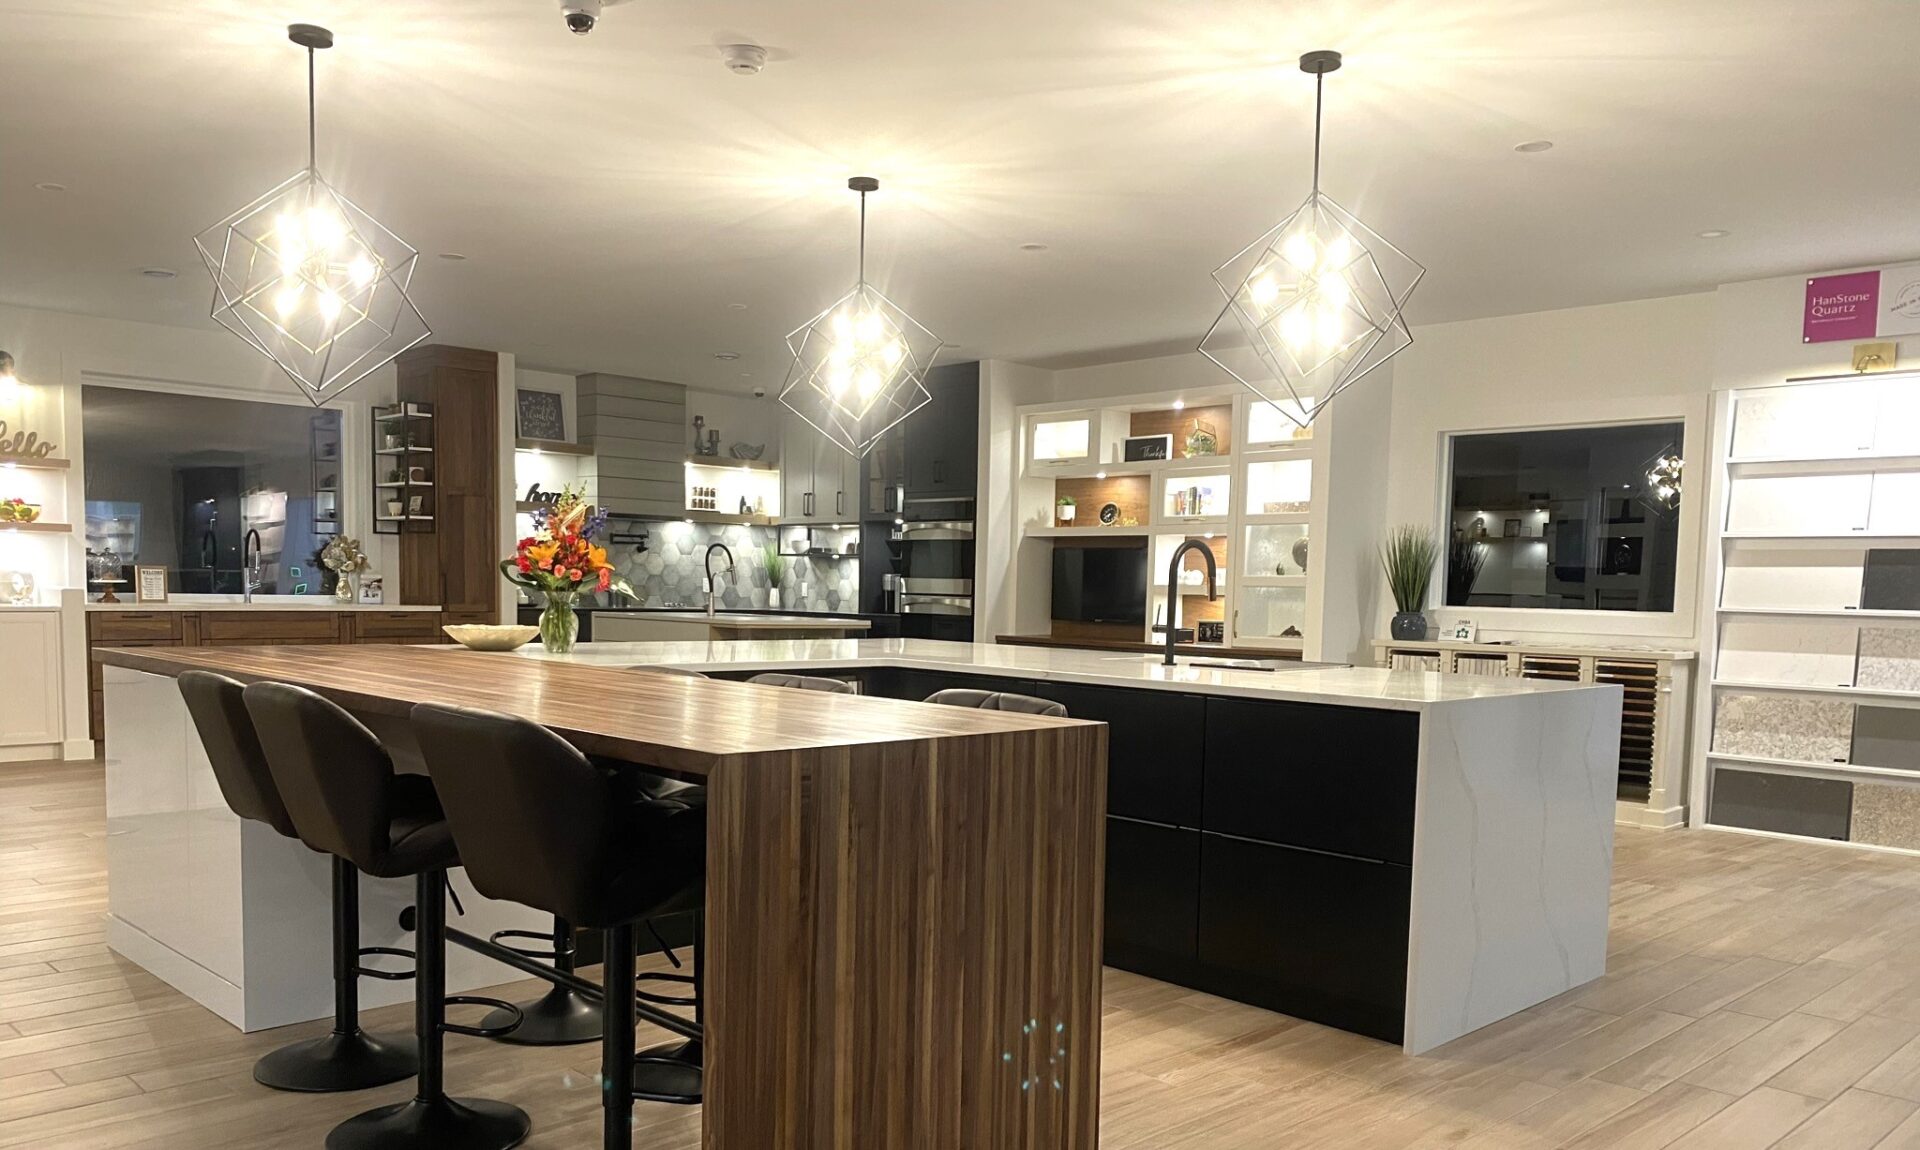 A modern kitchen with geometric pendant lights, a large island with seating, dark cabinetry, built-in appliances, and white countertops.